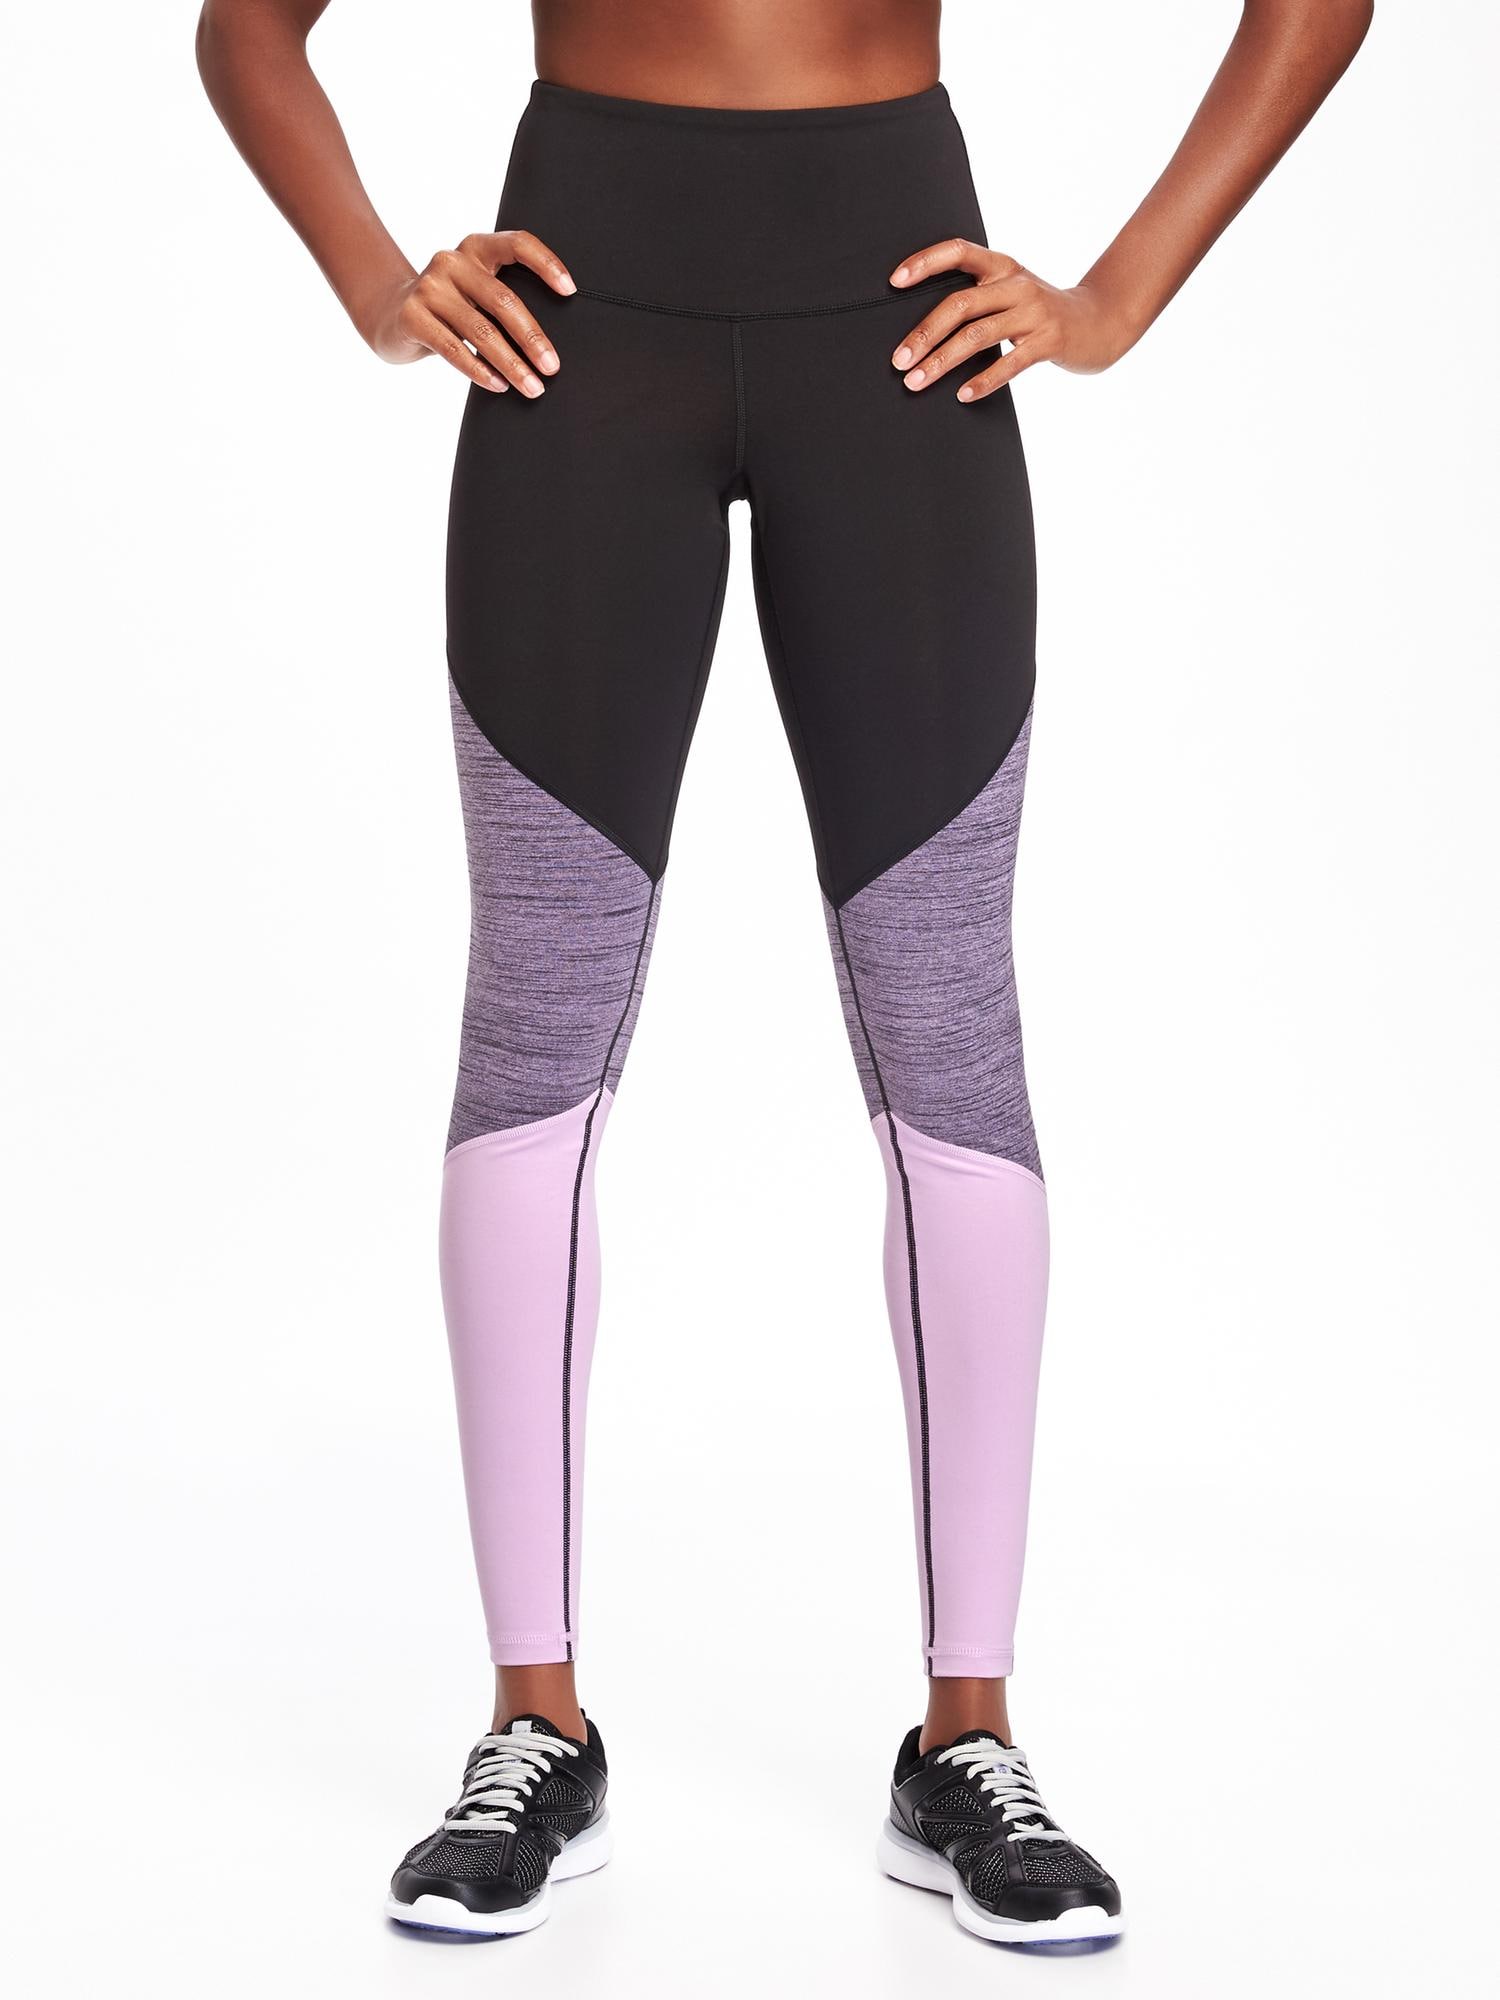 Go-Dry High-Rise Color-Block Compression Tights for Women